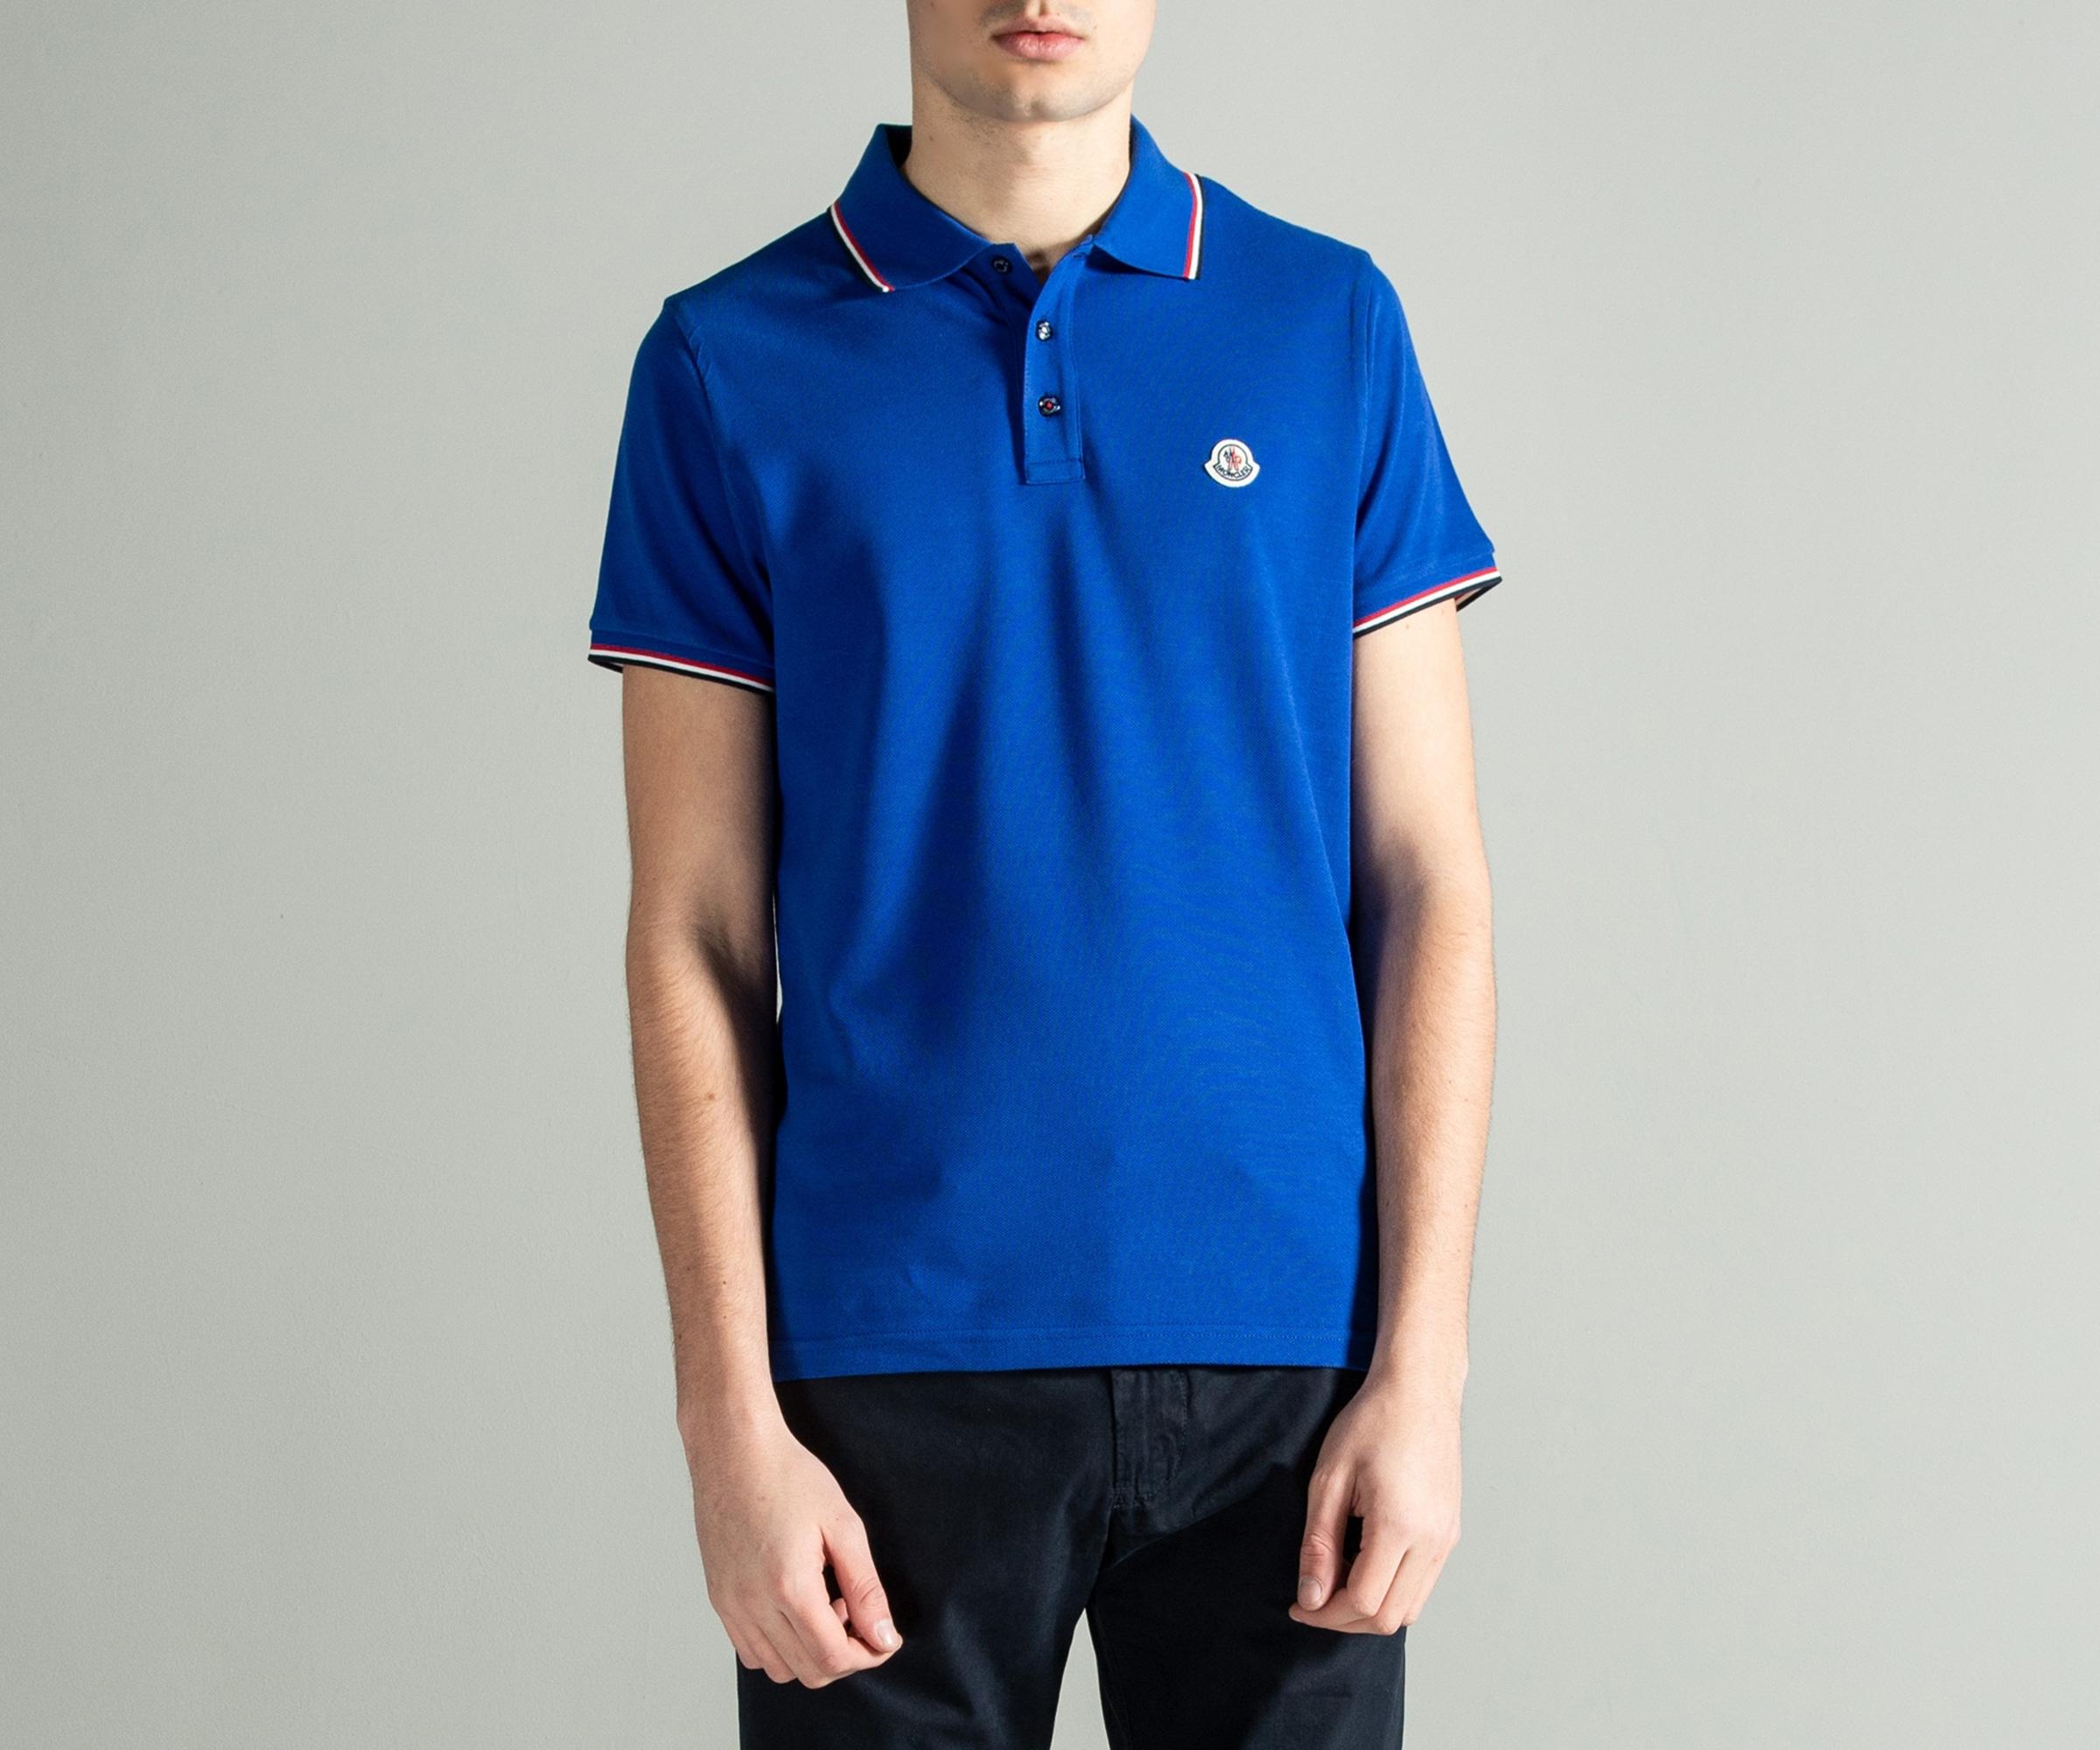 moncler royal blue,OFF 57%,www.concordehotels.com.tr